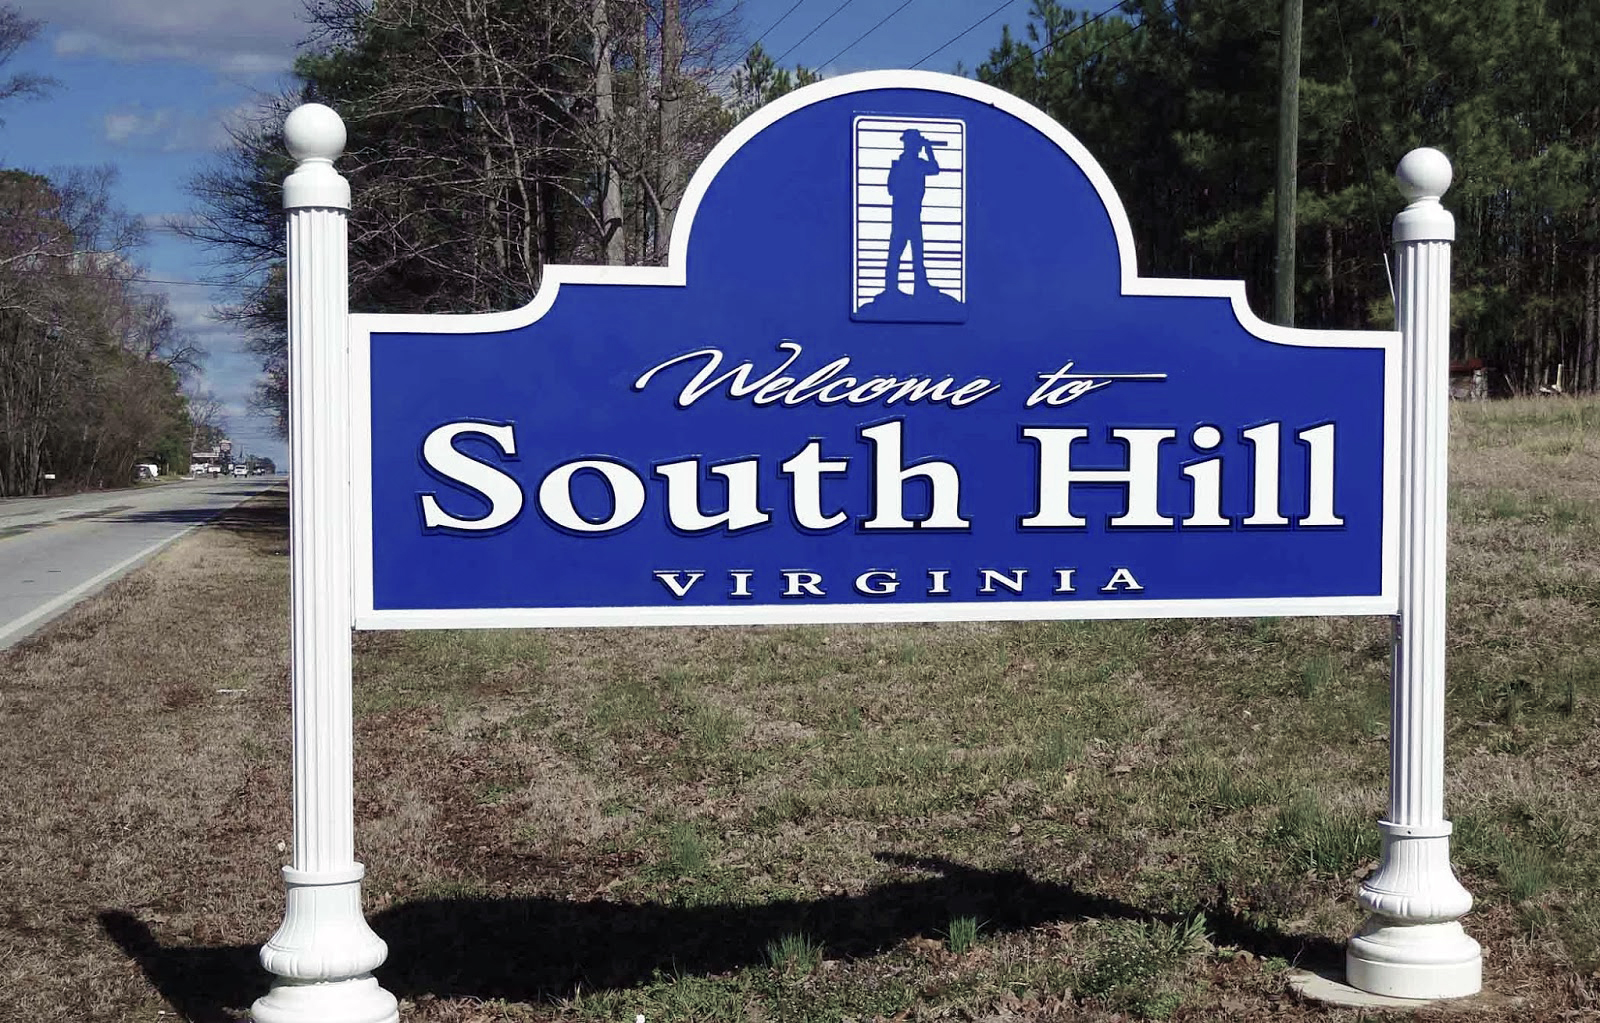 Is South Hill Tap Water Safe to Drink? Tap water & safety quality